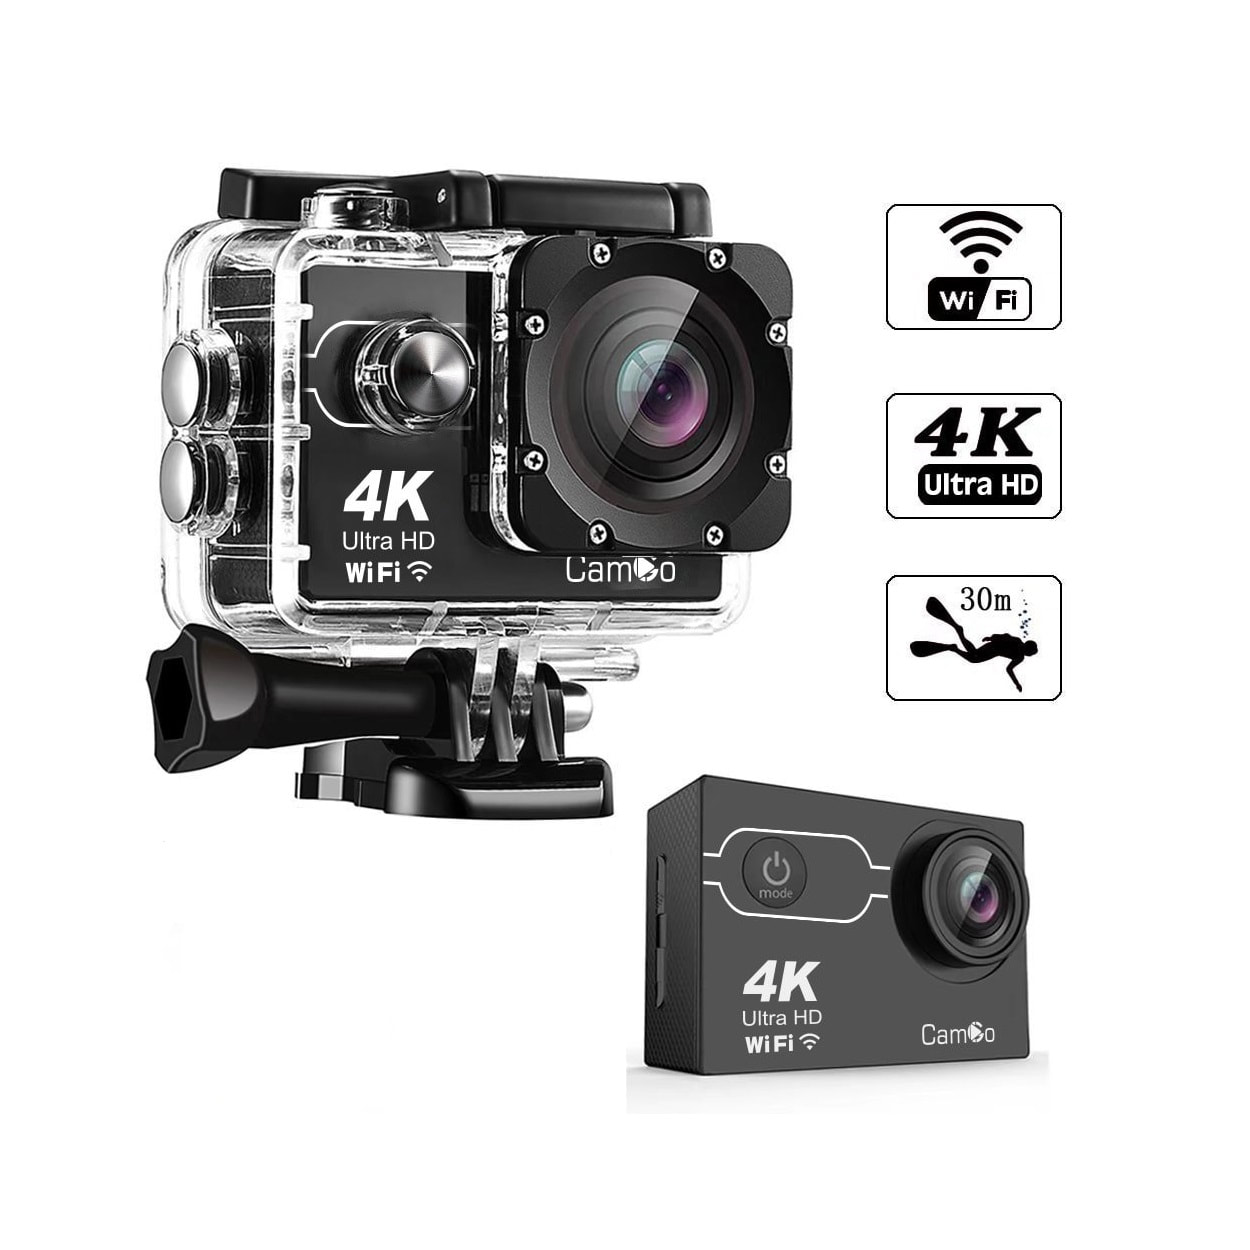 Waterproof Sports Action Camera,12 Million Pixels 1080P 2 Inch LCD Screen 170 Degree Wide Angle Lens 30m Sport Camera DV Camcorder with Mounting Accessories Kit 